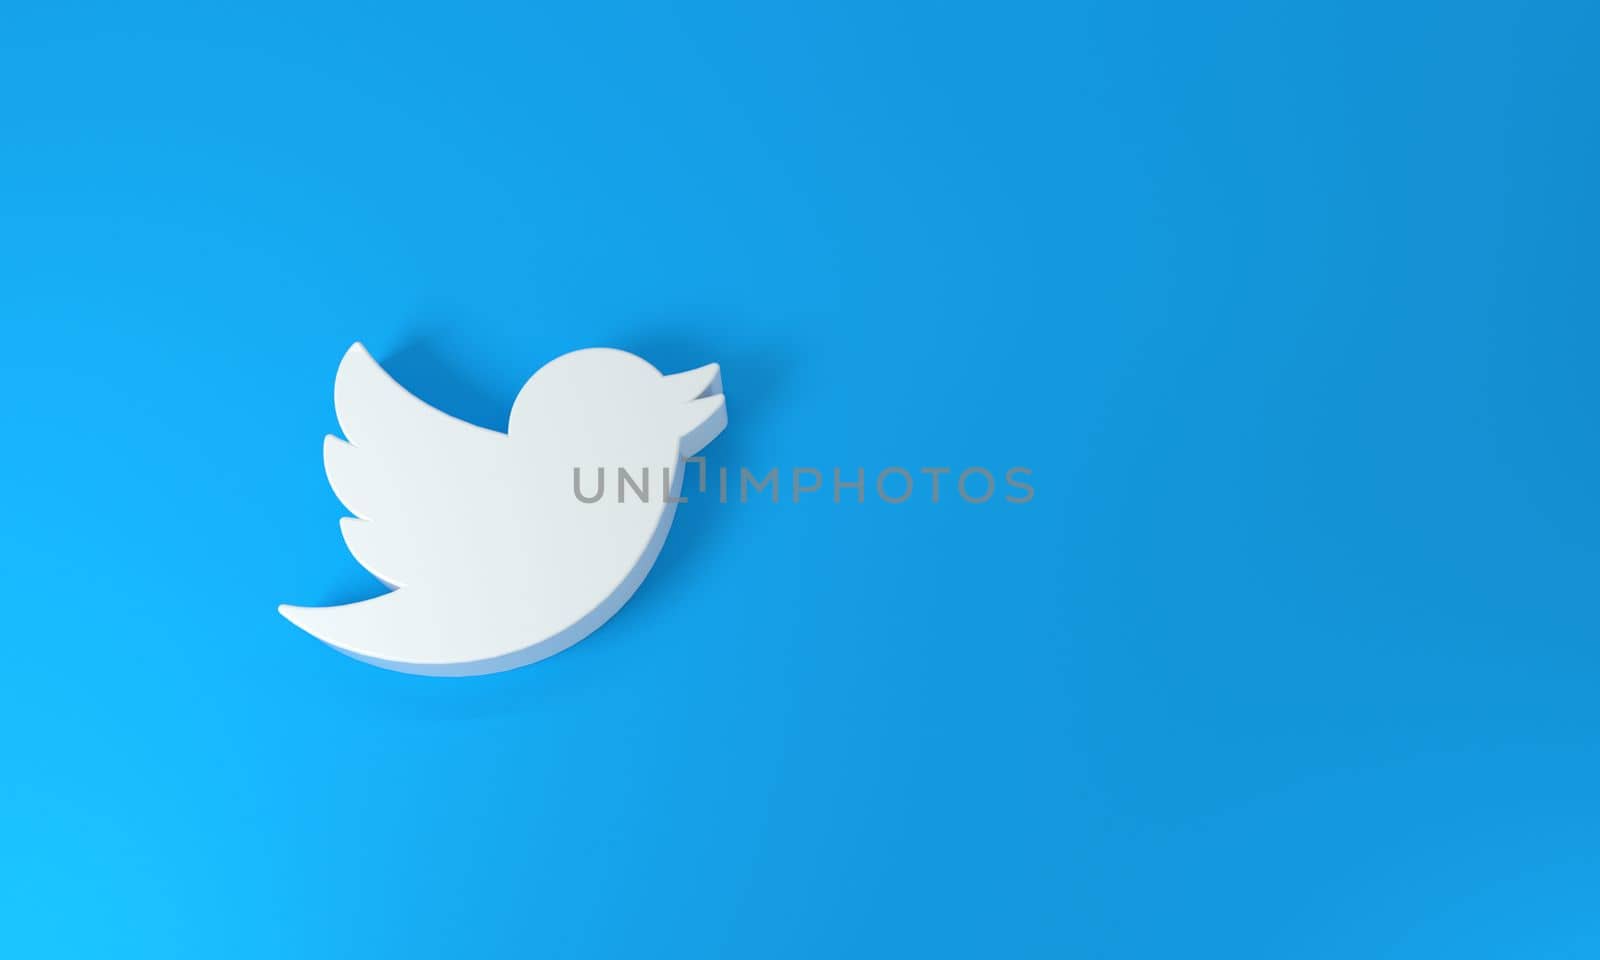 Twitter logo on blue background - top view. by ImagesRouges